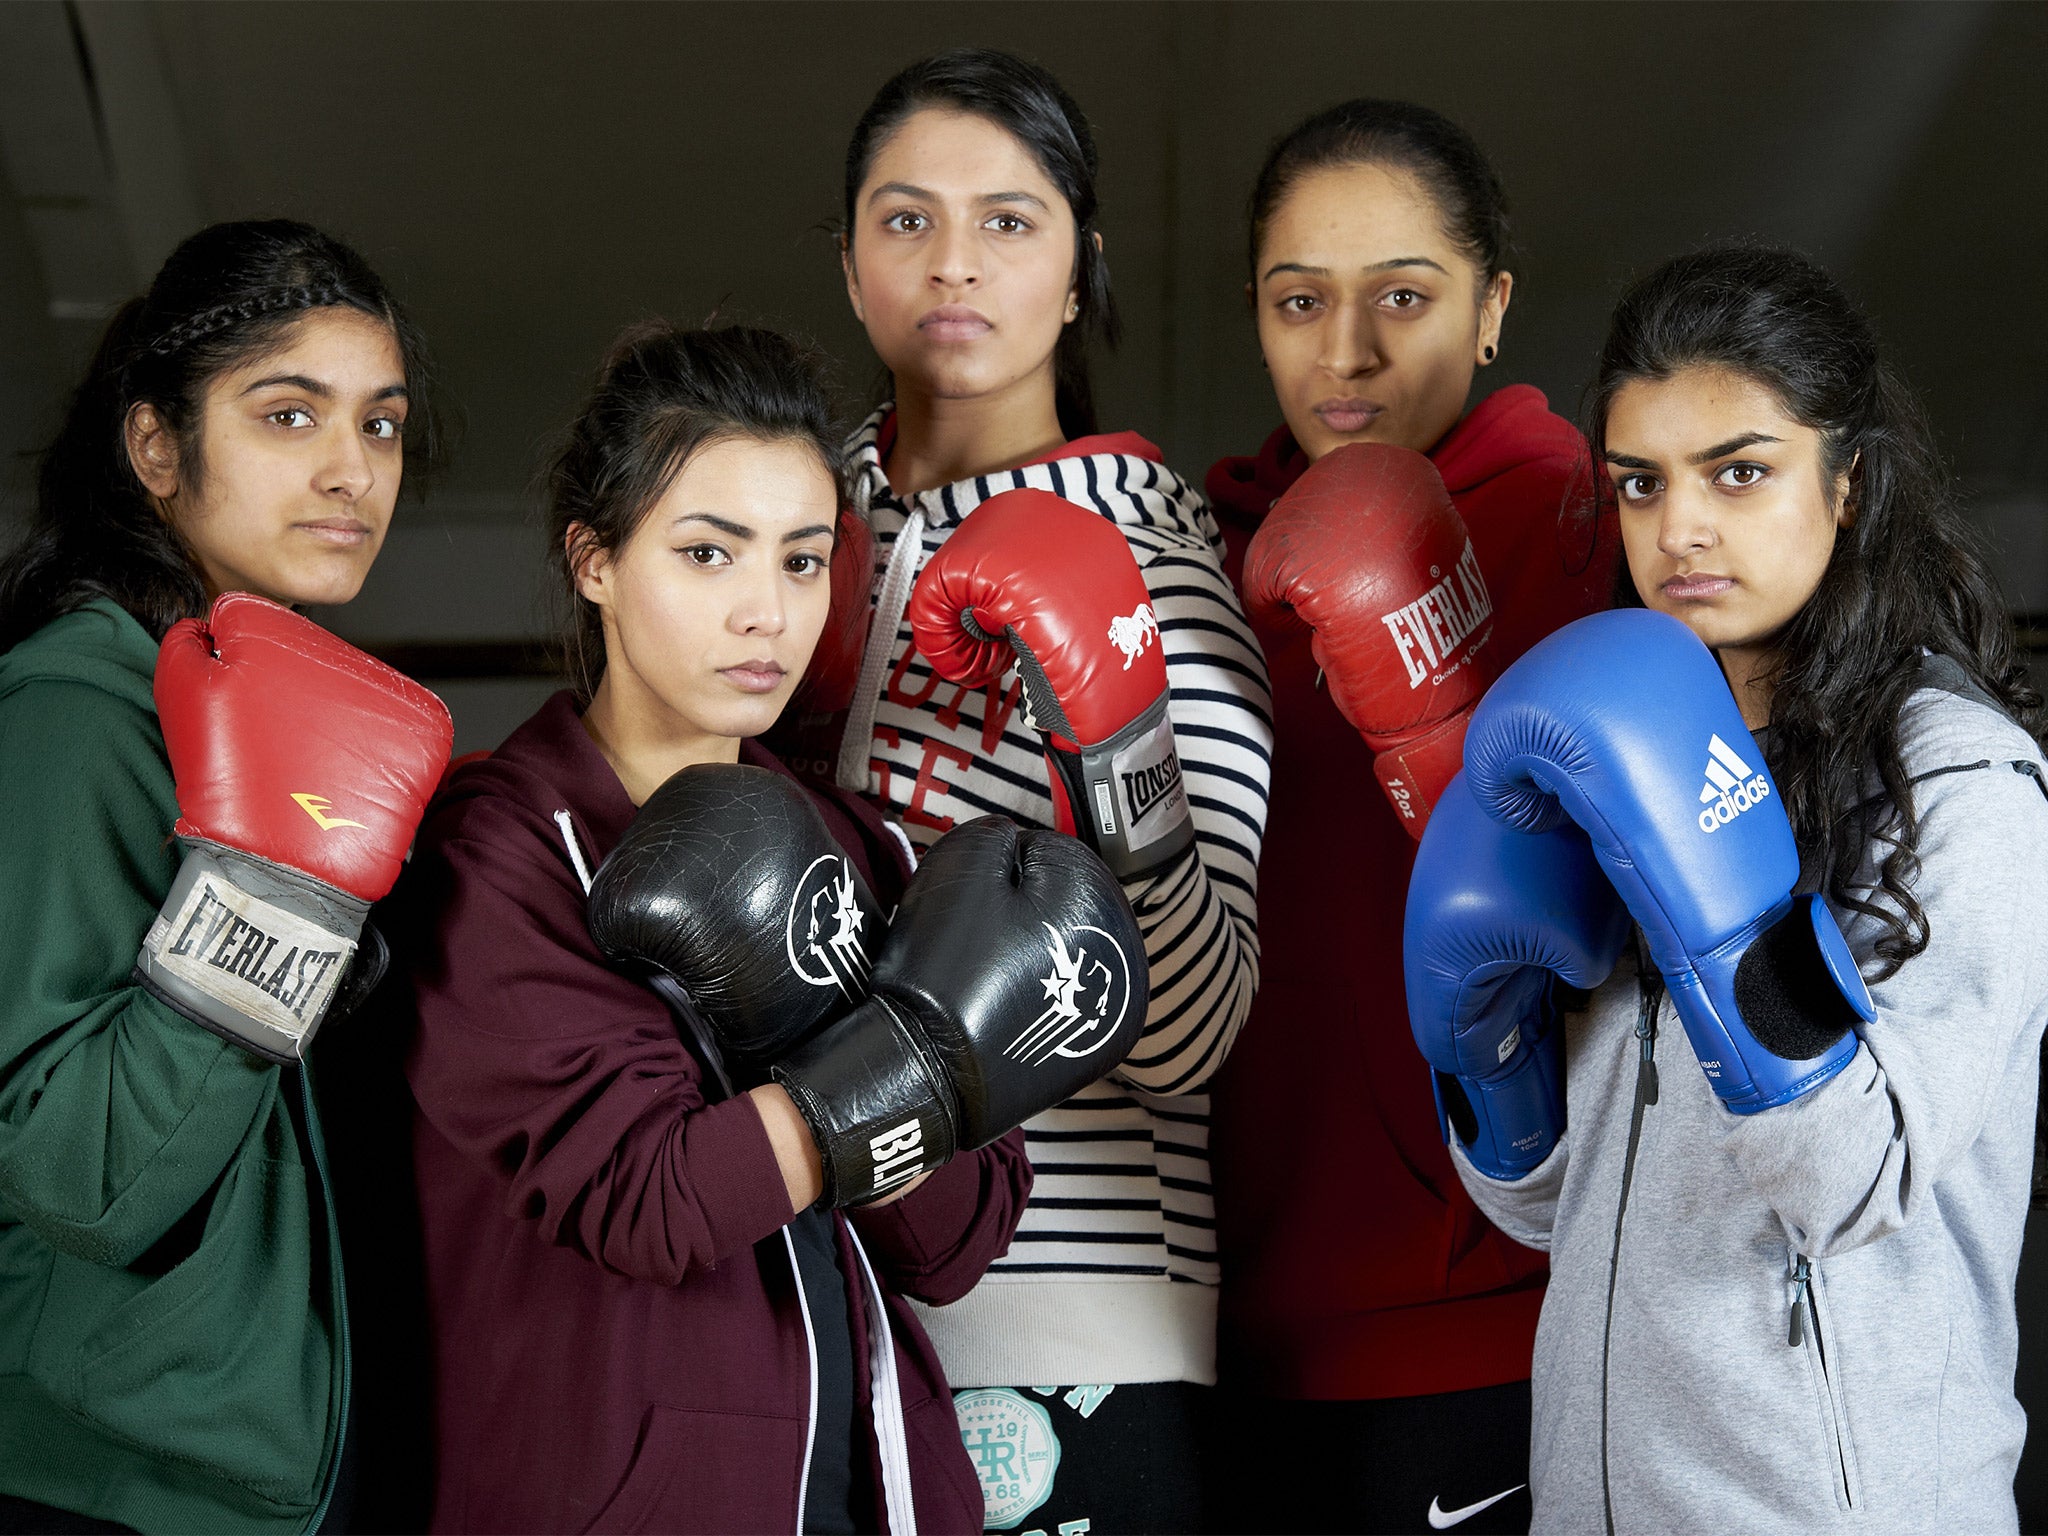 Pakistani women come out fighting A hard-hitting play focuses on female Muslim boxers The Independent The Independent photo